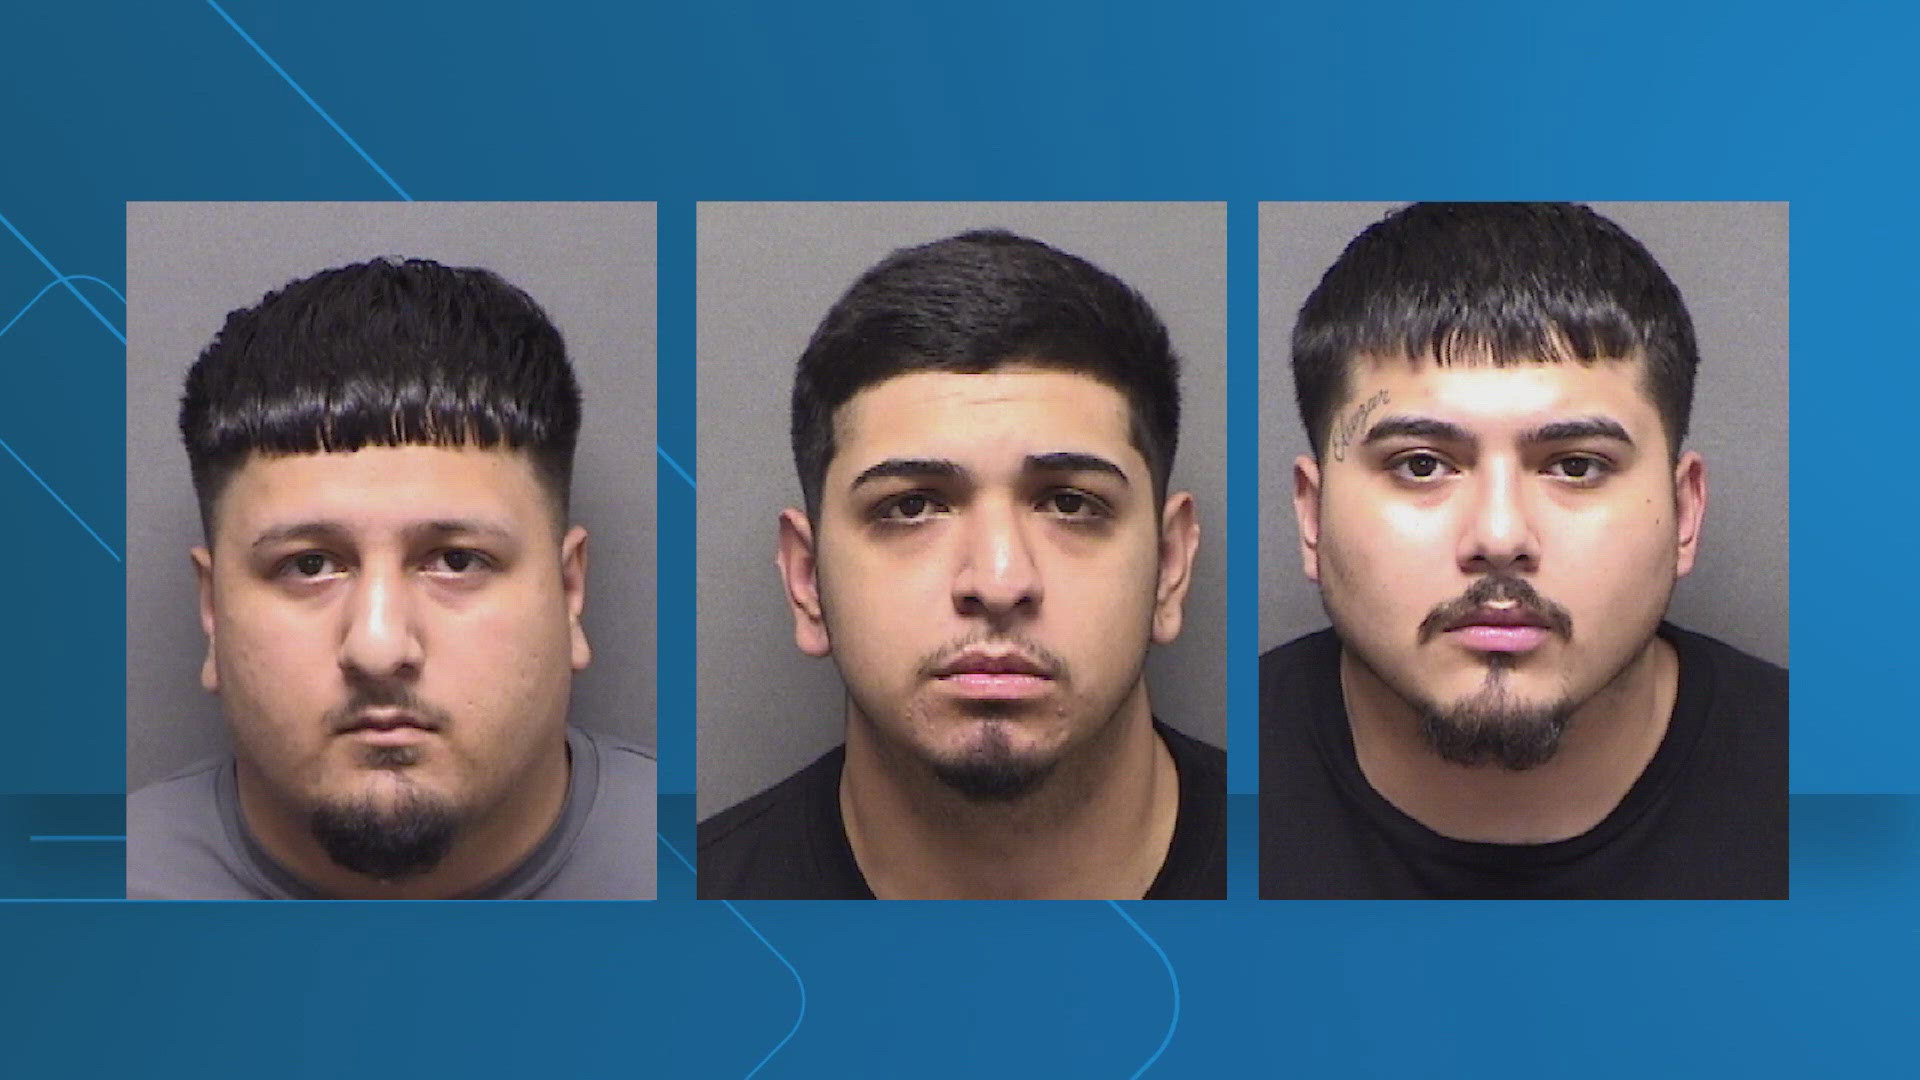 During investigations police were able to connect Jesus Gonzalez, Adrian Flores and Andres Escobar to 15 vehicle thefts.